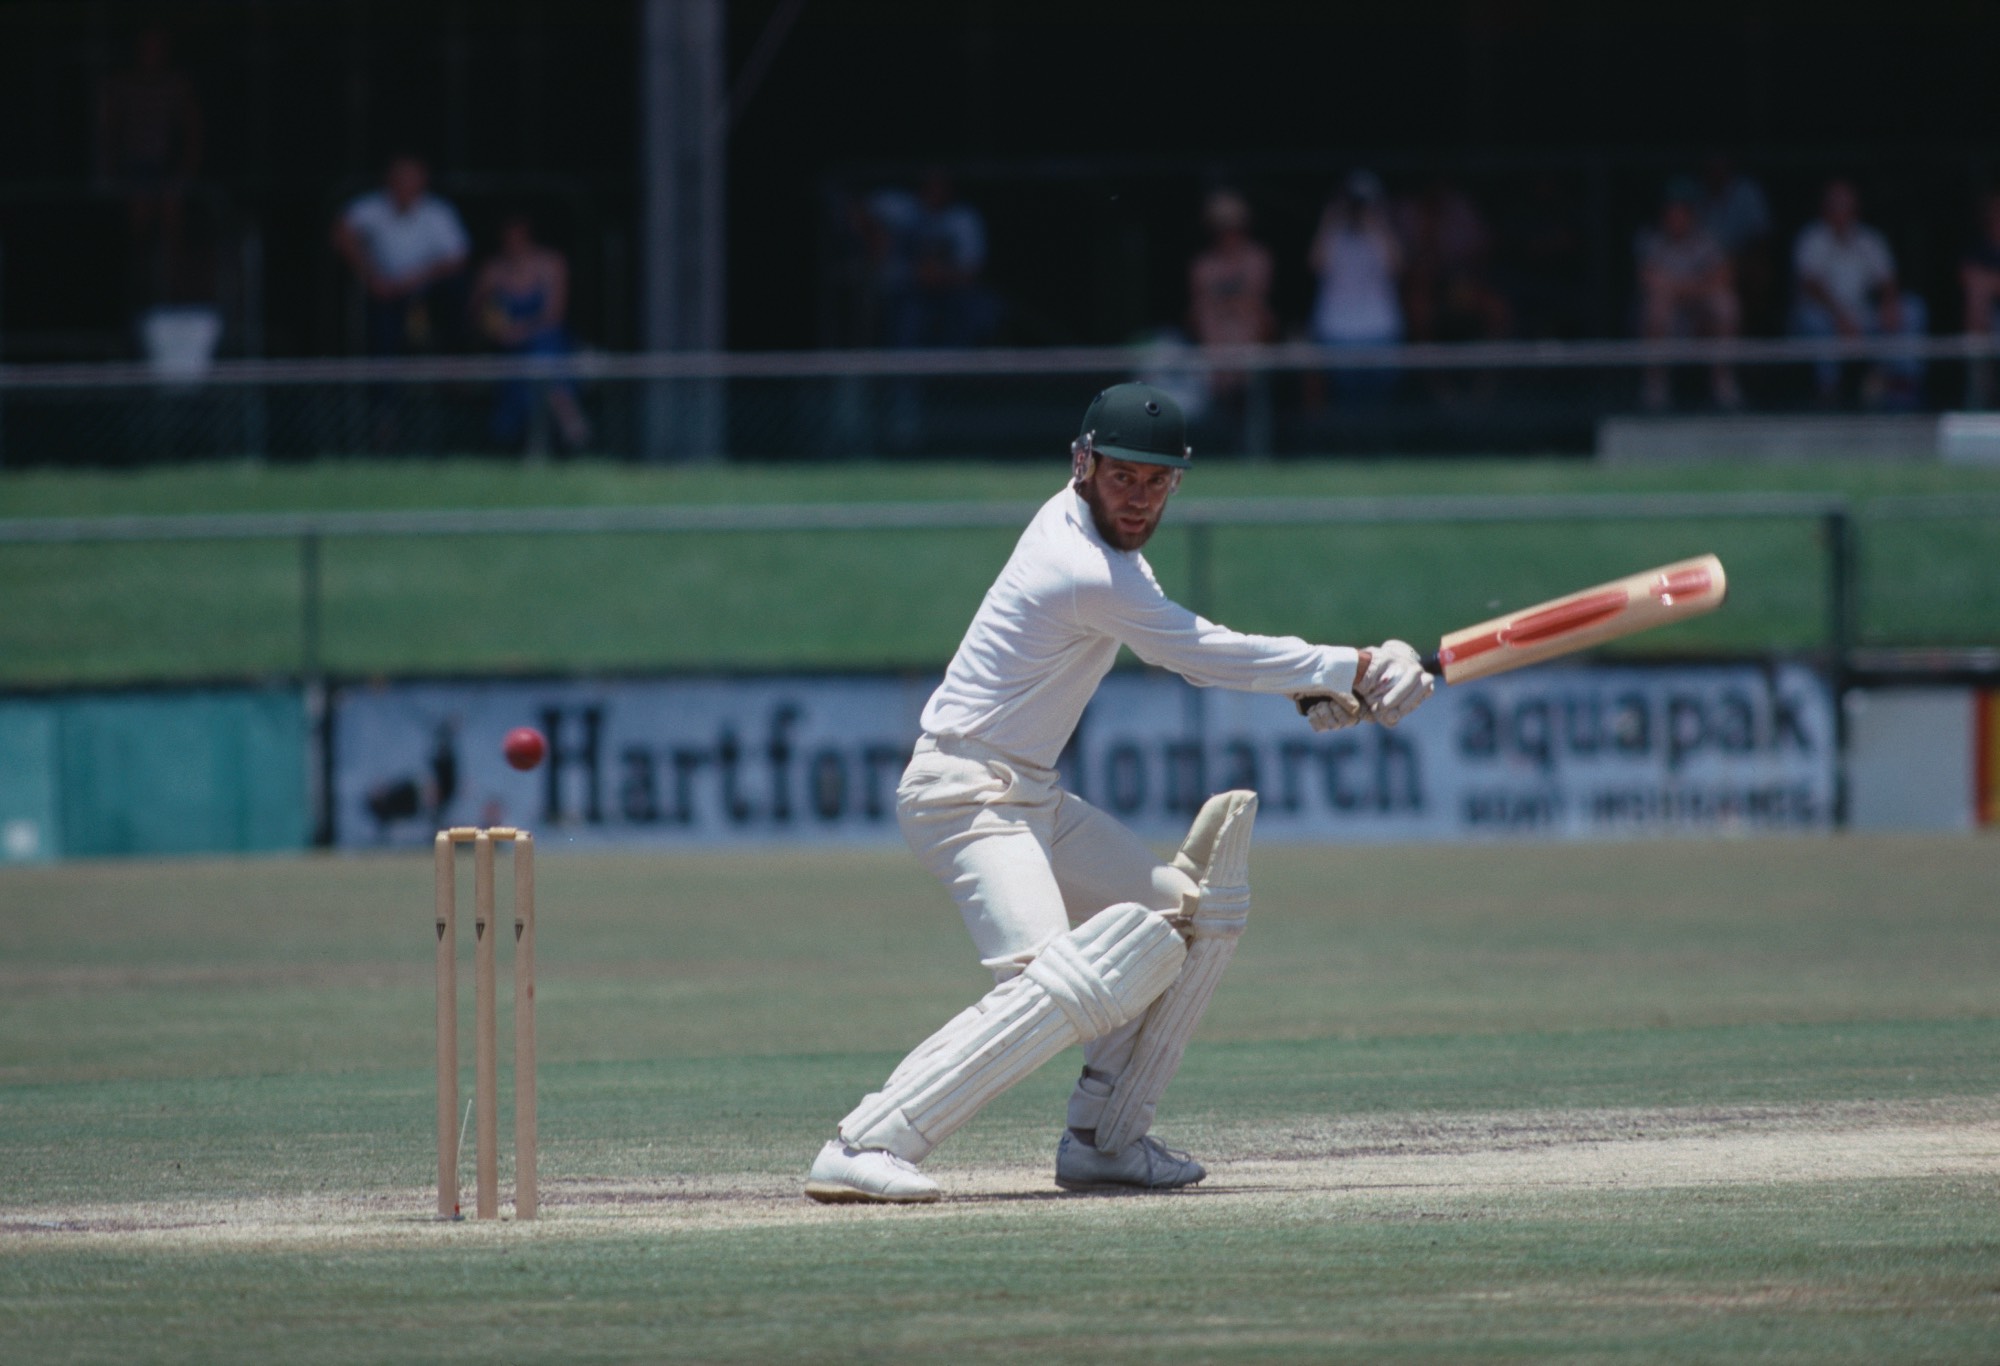 Australian captain Greg Chappell batting against the West Indies in the First Test at Brisbane Cricket Ground, Brisbane, Australia, 1st-5th December 1979. (Photo by Adrian Murrell/Getty Images)